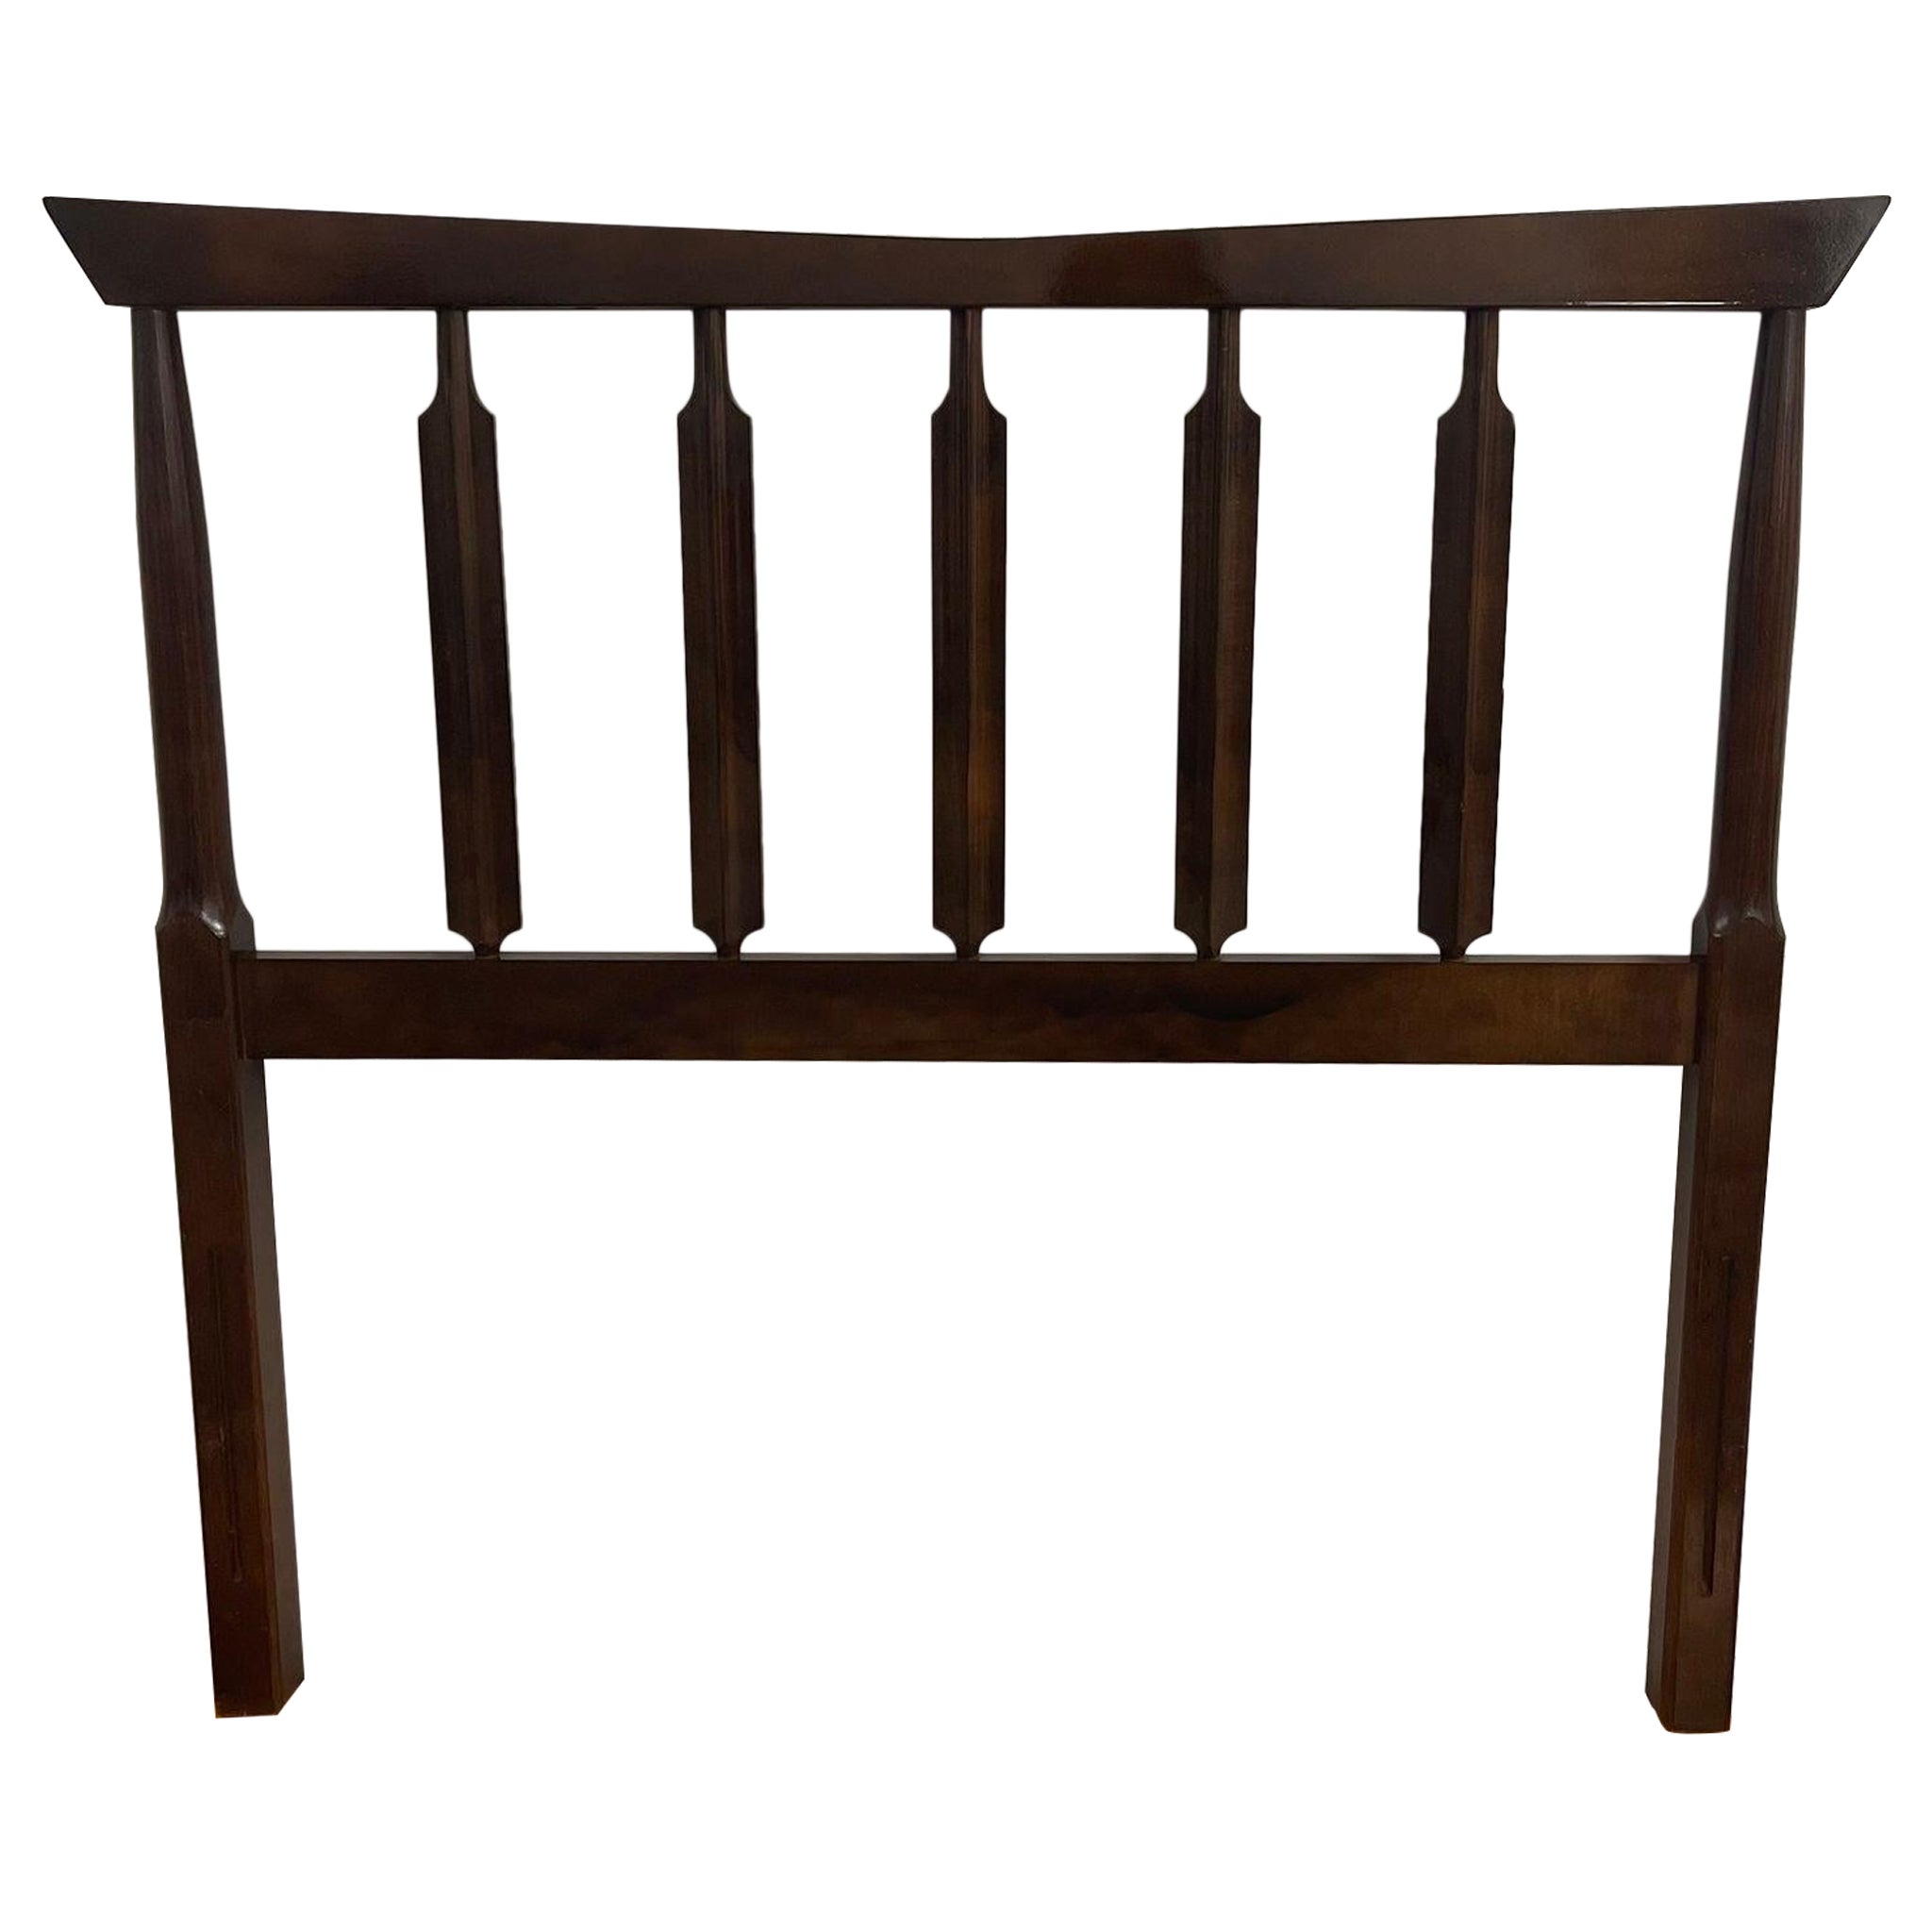 Vintage Wooden Spindle Twin Headboard With Metal Frame.